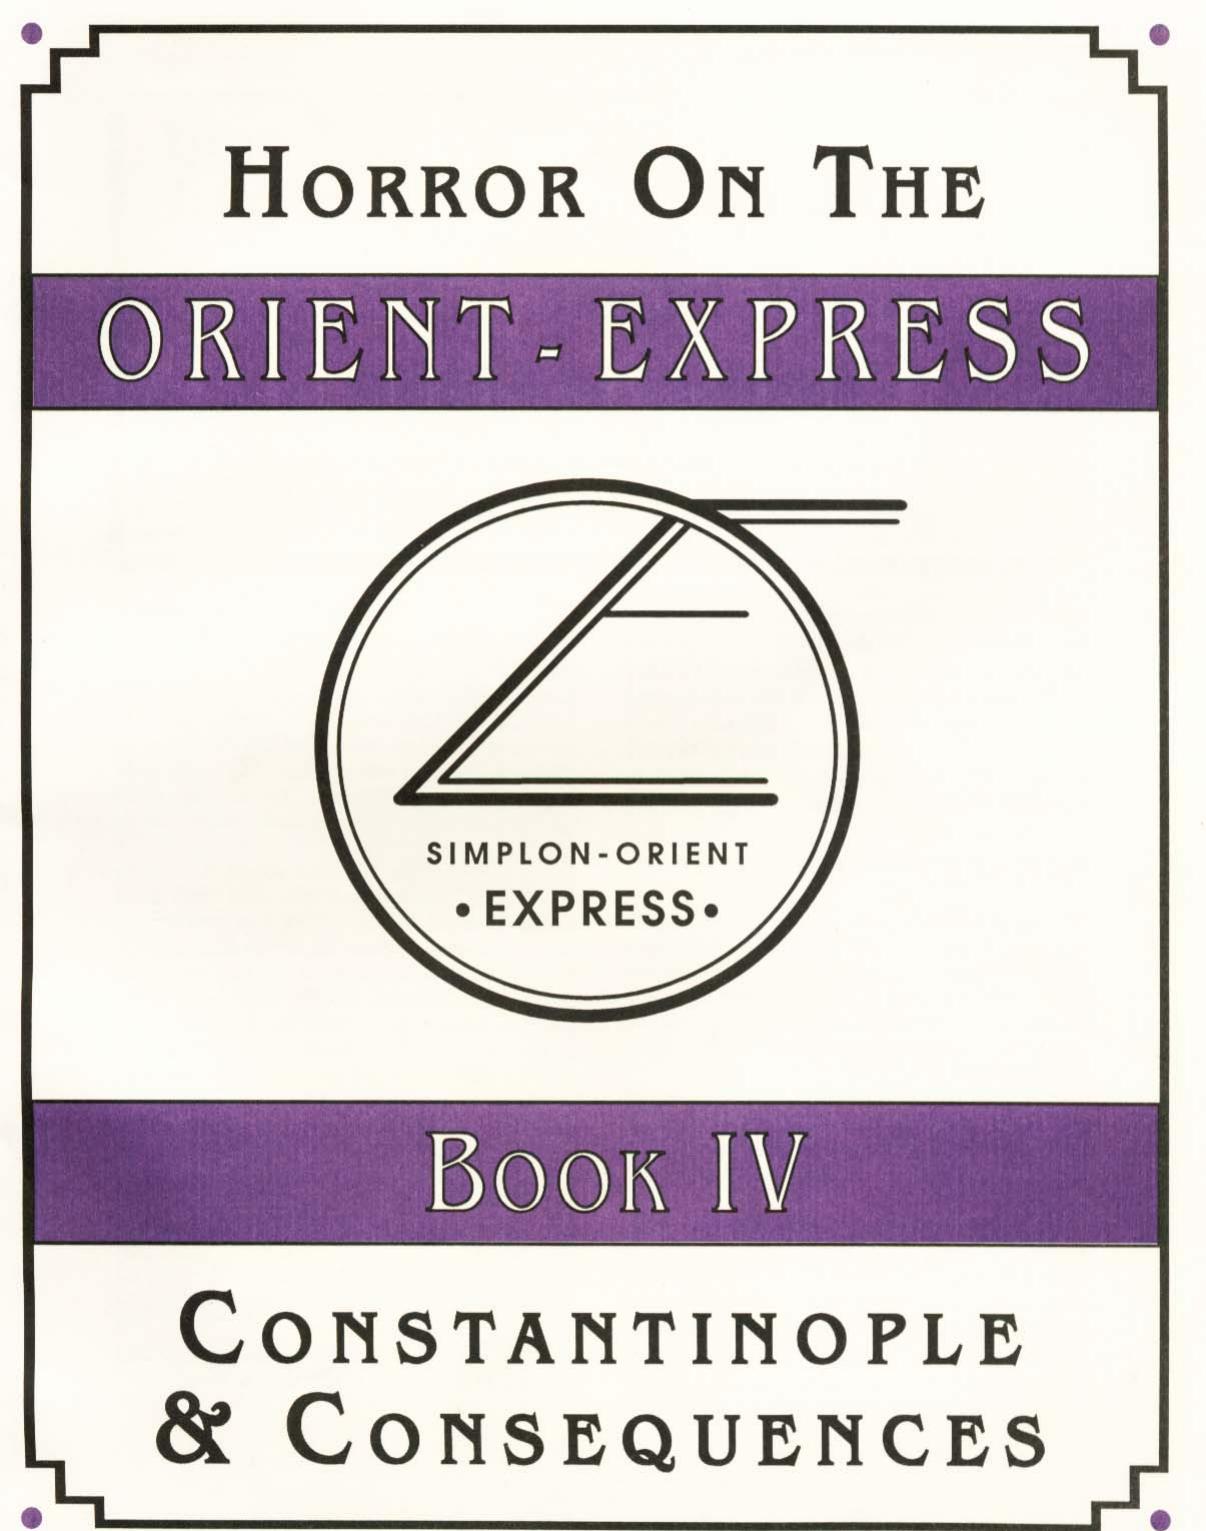 CoC Horror on the Orient Express Book 4